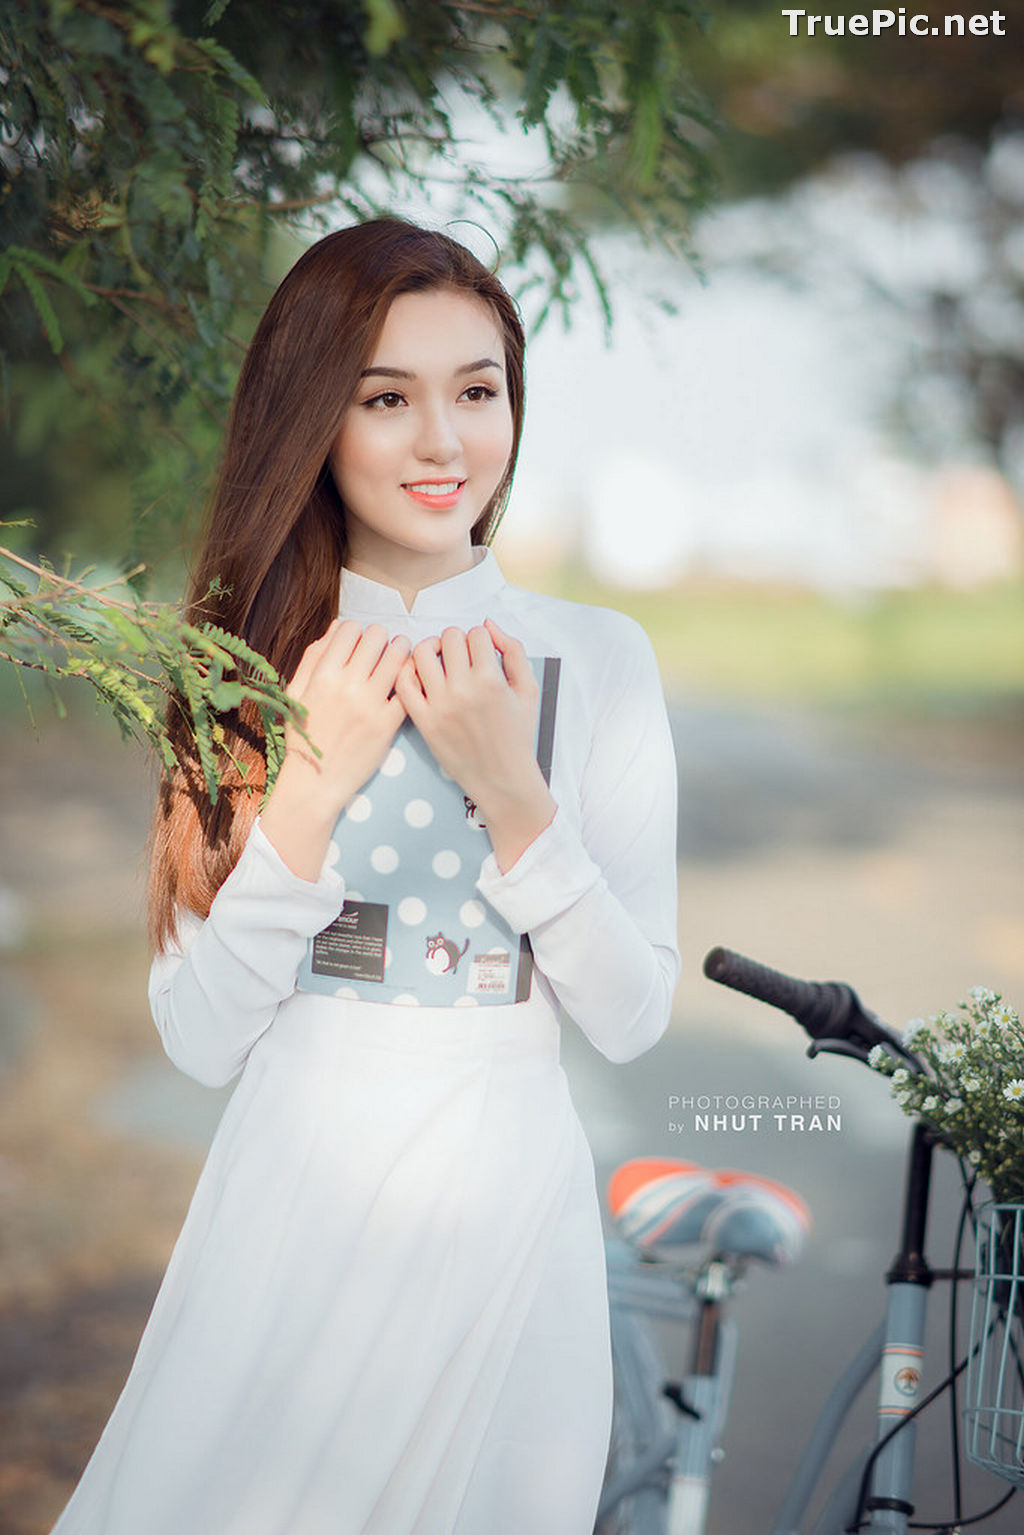 Image The Beauty of Vietnamese Girls with Traditional Dress (Ao Dai) #5 - TruePic.net - Picture-49